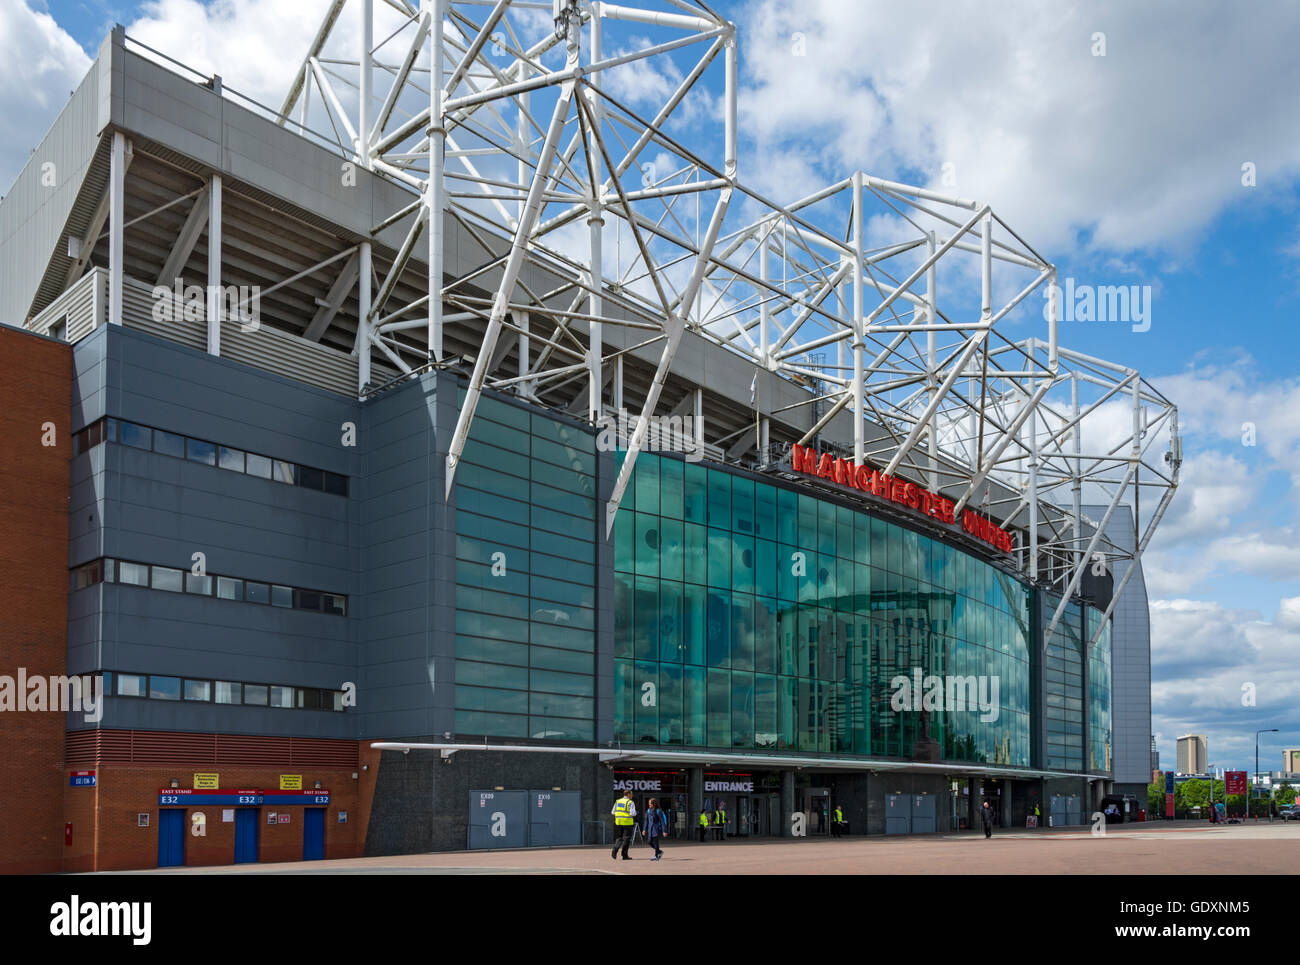 The Manchester United football stadium, Old Trafford, Manchester, England, UK. Stock Photo